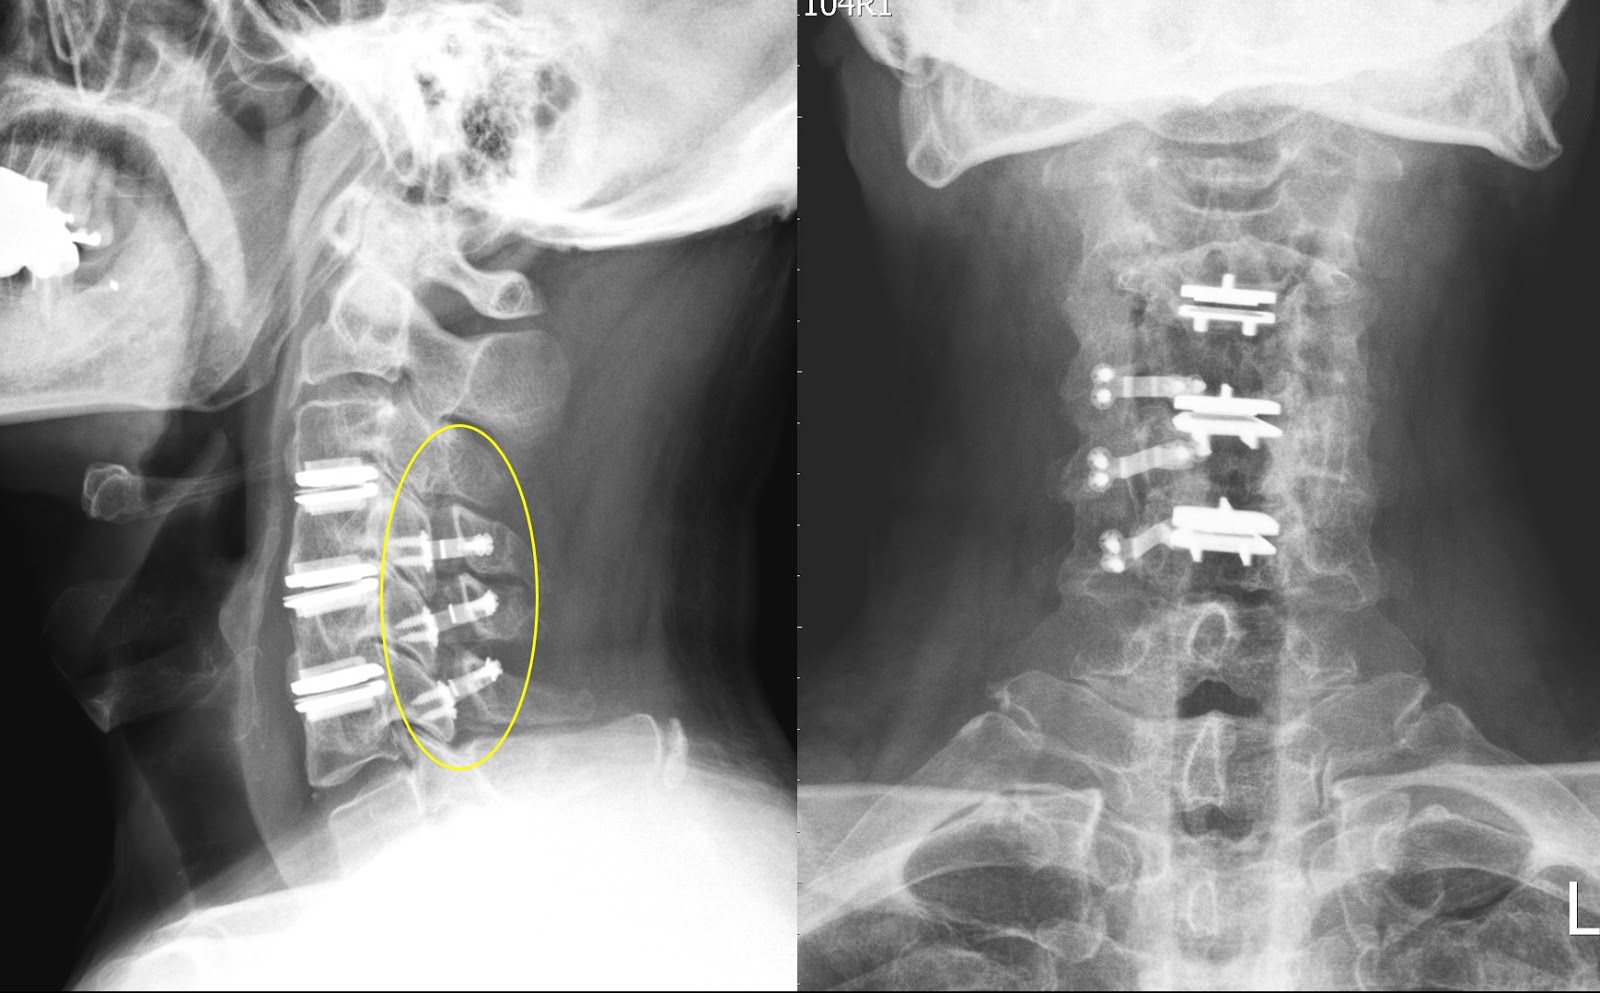 may reinforce a metal plate screwed into the vertebrae (cage, screw and plate)